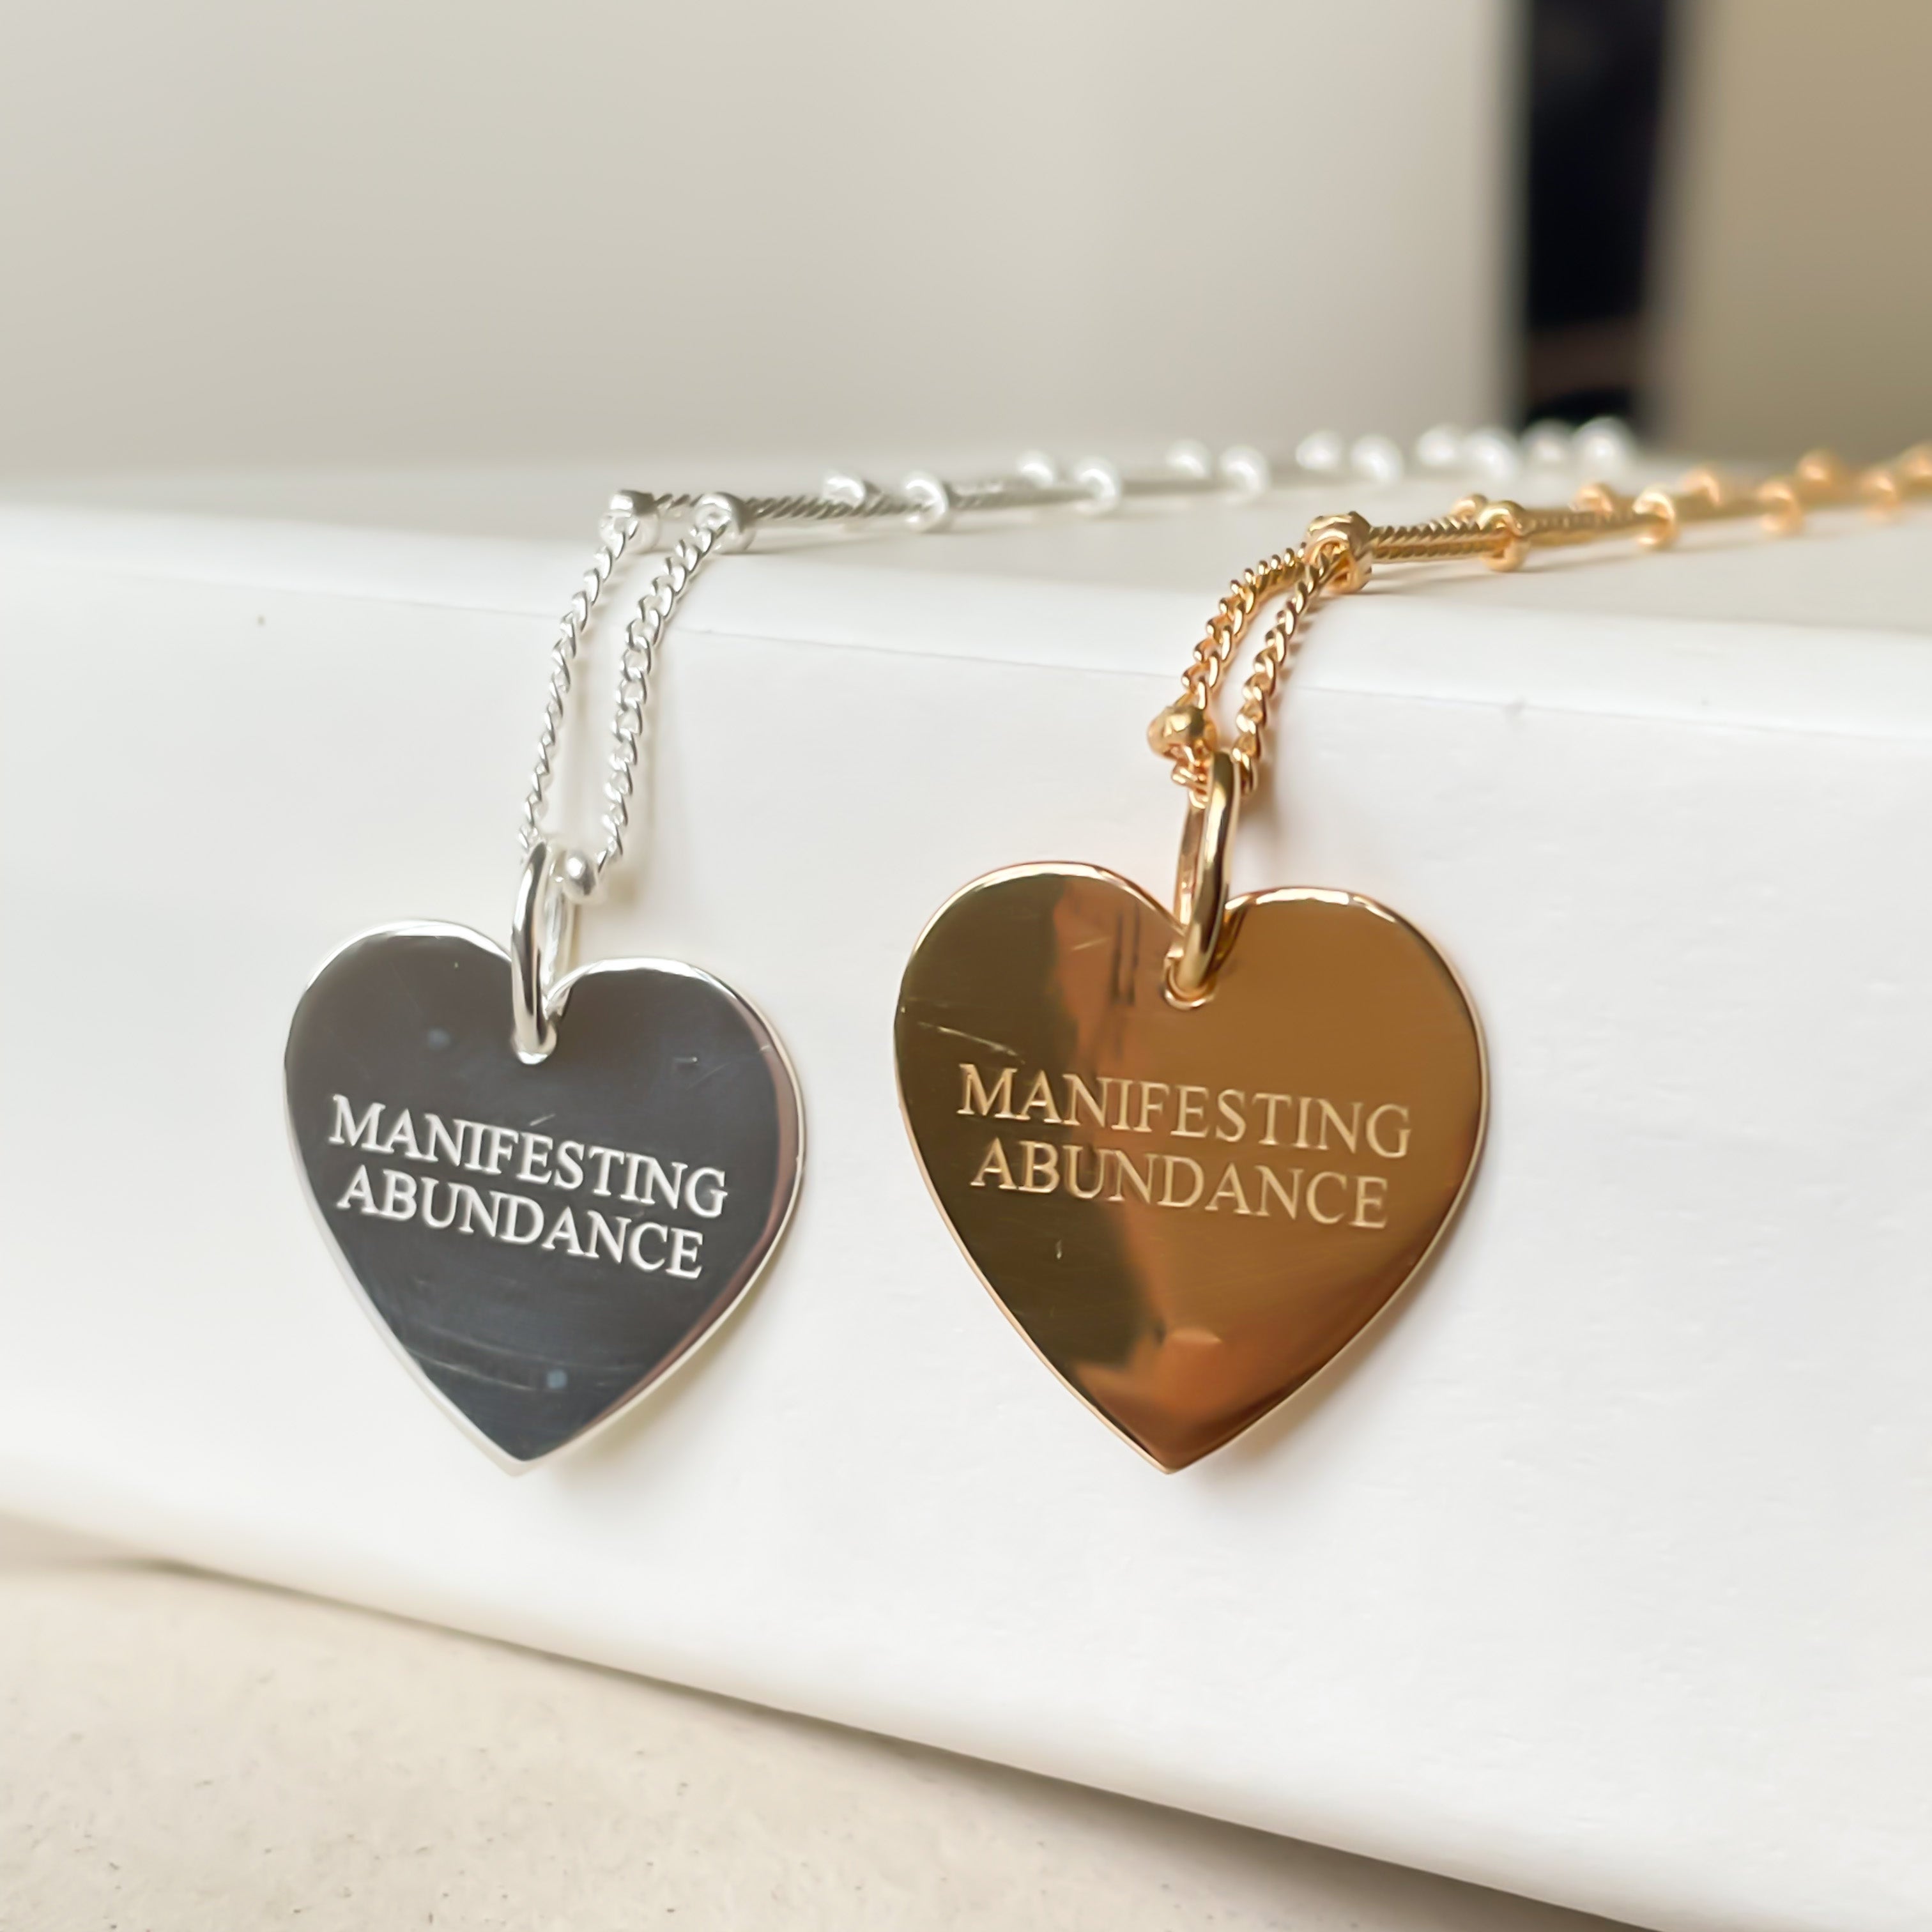 Personalised Self-Love and Affirmation Necklace - Octonov 